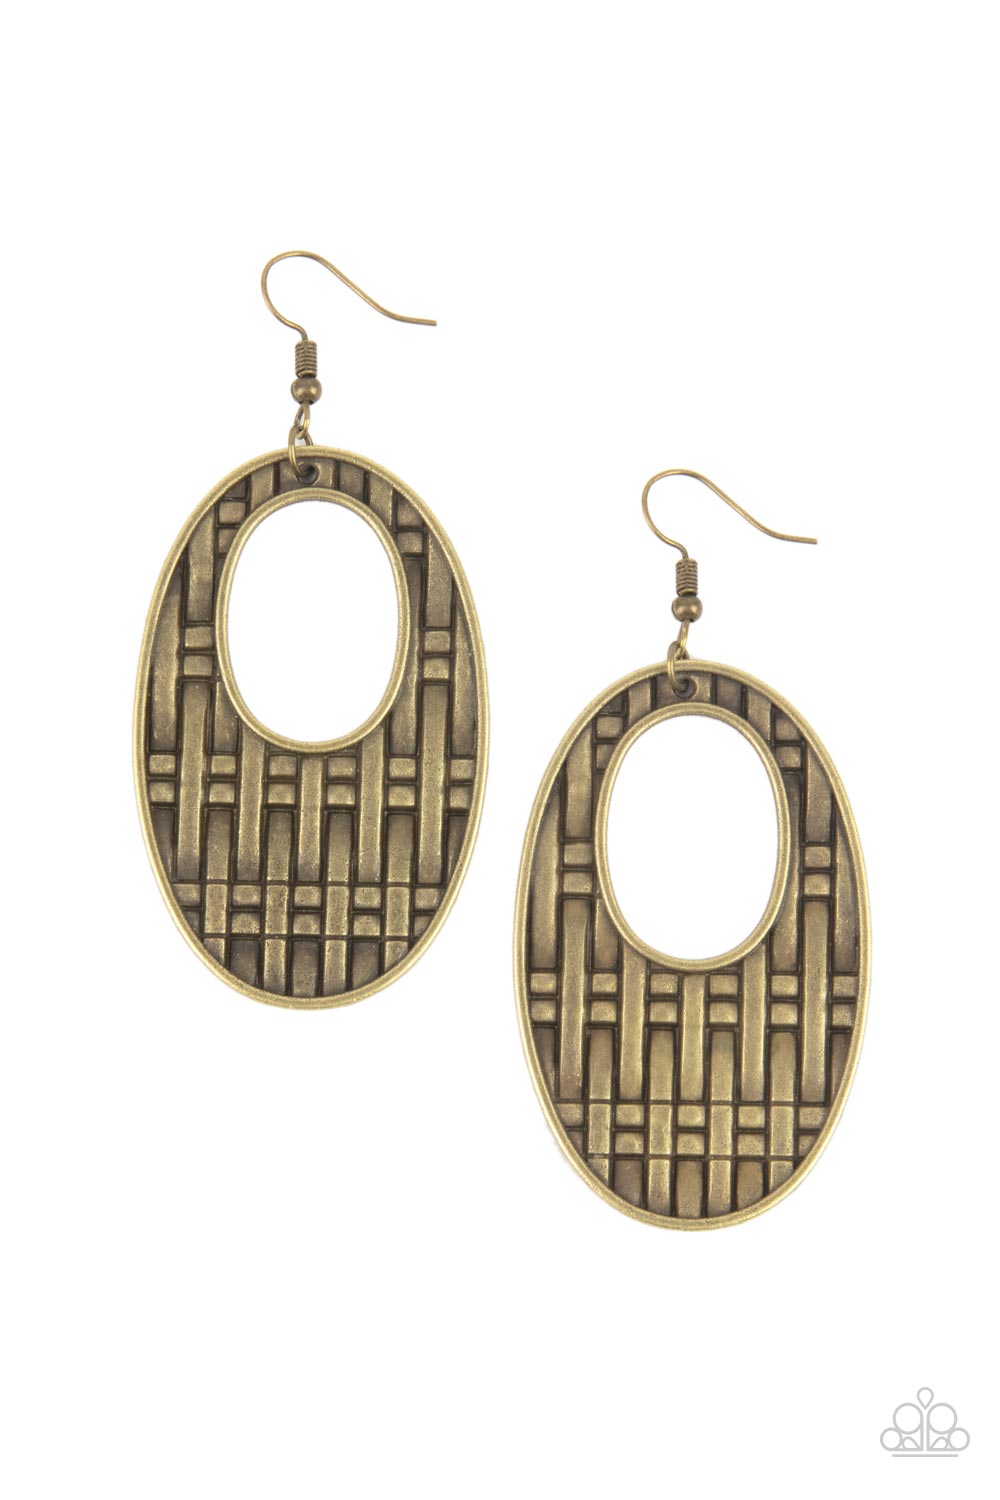 Engraved Edge - Brass Earrings - Paparazzi Accessories 